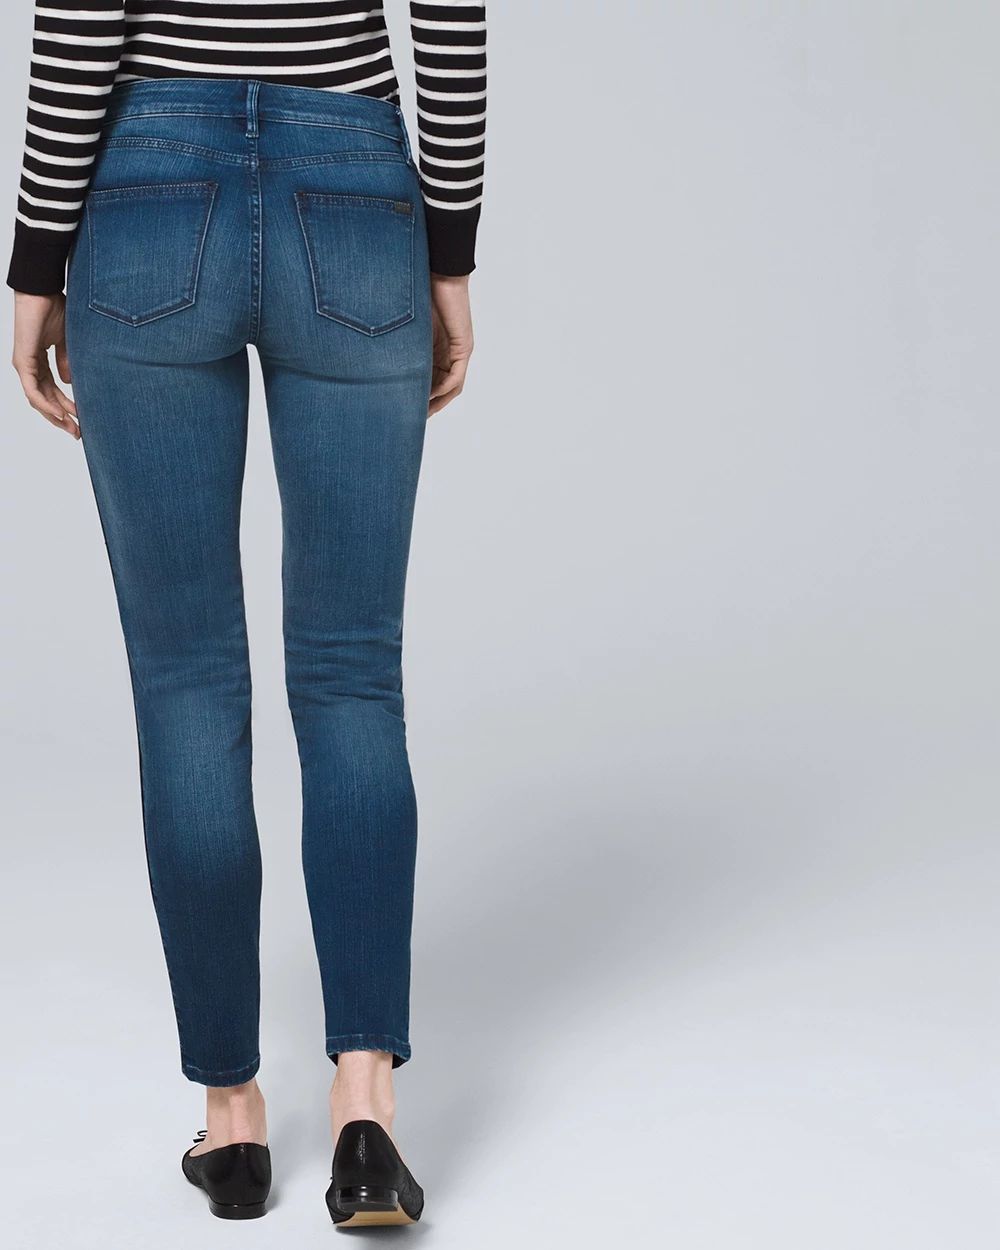 Mid-Rise Skinny Ankle Jeans with Faux Leather Trim click to view larger image.